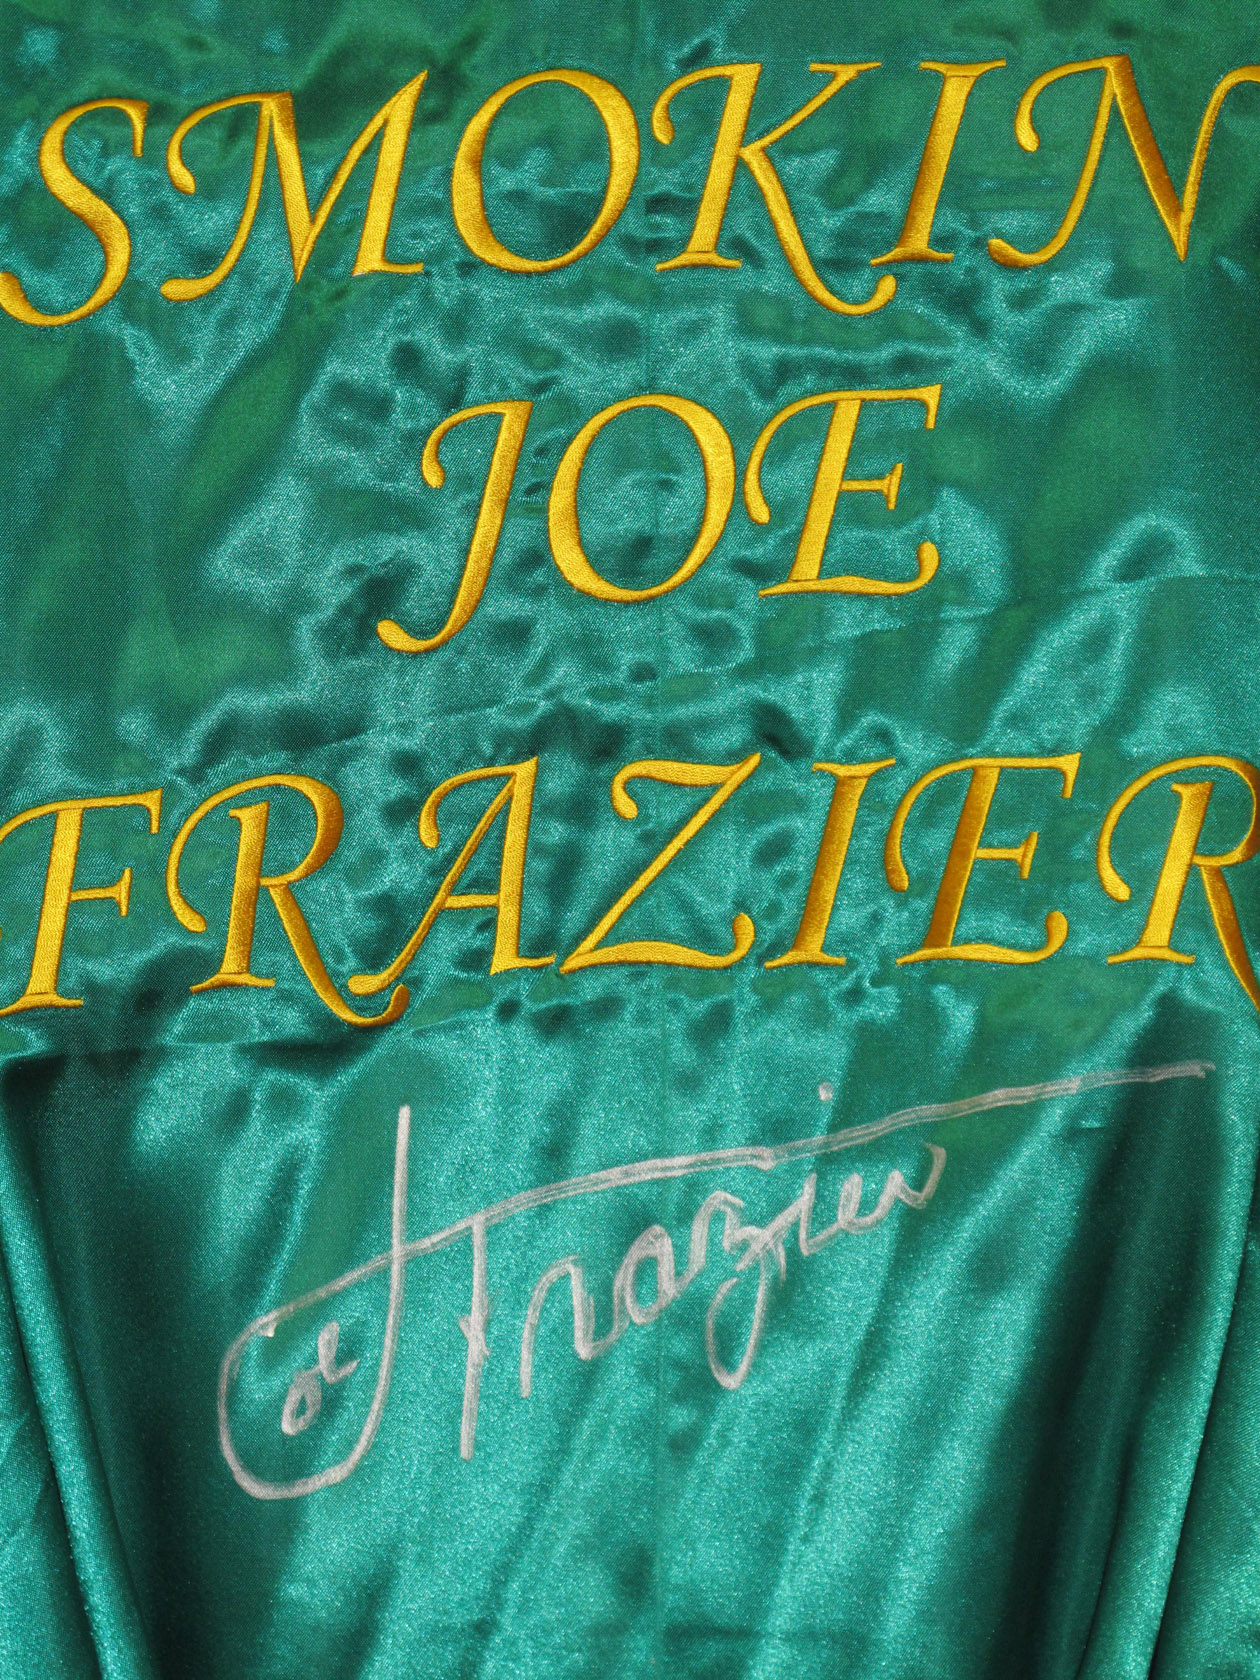 Lot Detail - Joe Frazier Signed Personal Model Silk Boxing Robe with  Signing Photo (ASI)